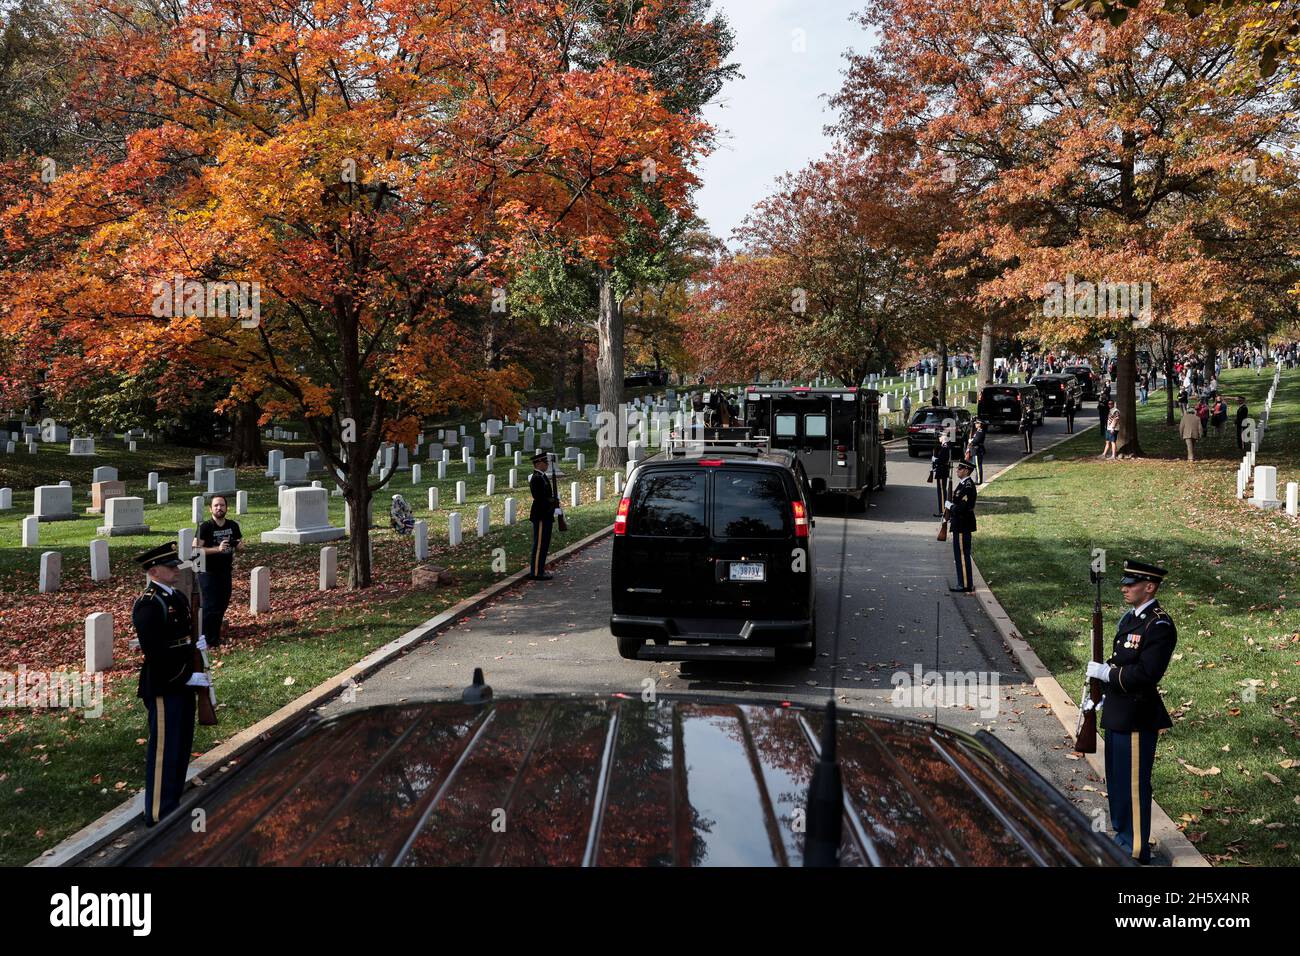 The Presidential Motorcade carrying President Joe Biden heads towards the Arlington National Cemetery to participate in a Presidential Armed Forces Full Honor Wreath-Laying Ceremony on the 100th anniversary of the Tomb of the Unknown Soldier in Arlington, Virginia, U.S., on Thursday, Nov. 11, 2021. 2021 marks the centennial anniversary of the Tomb of the Unknown Soldier, providing a final resting place for one of America's unidentified World War I service members, and Unknowns from later wars were added in 1958 and 1984. Photographer: Oliver Contreras/Bloomberg Credit: Oliver Contreras/Pool Stock Photo